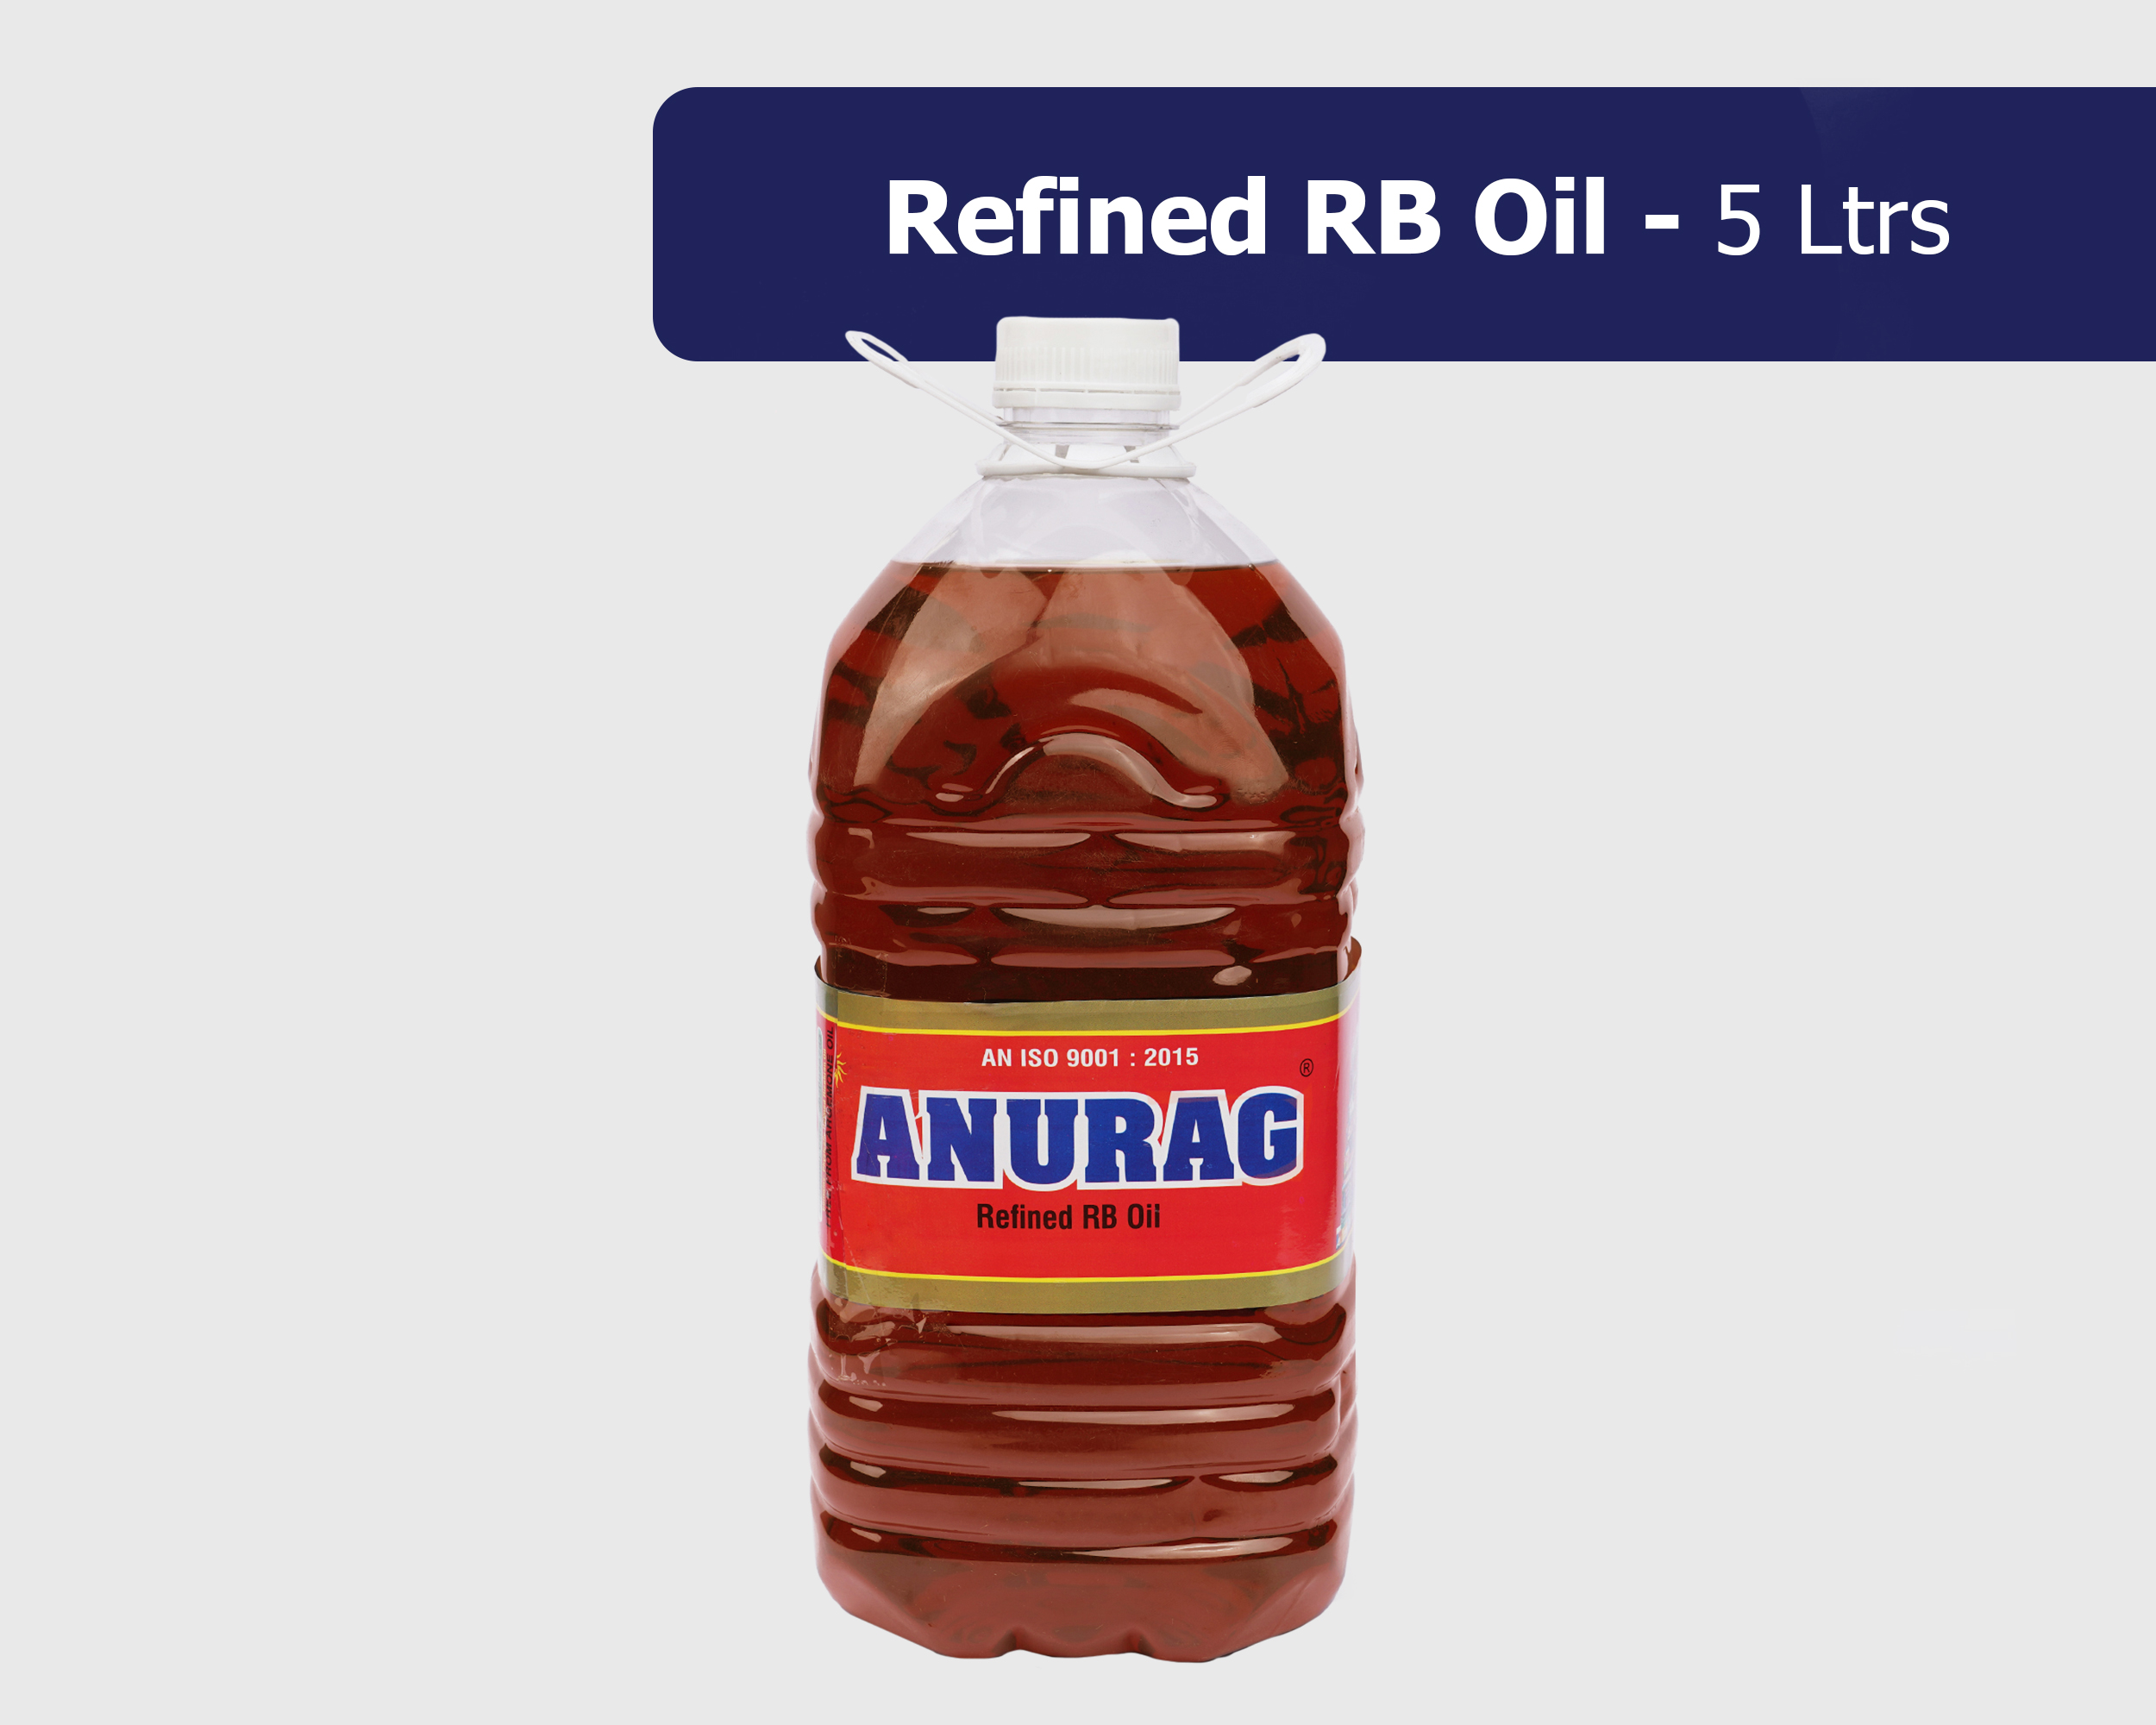 RB Refined Oil